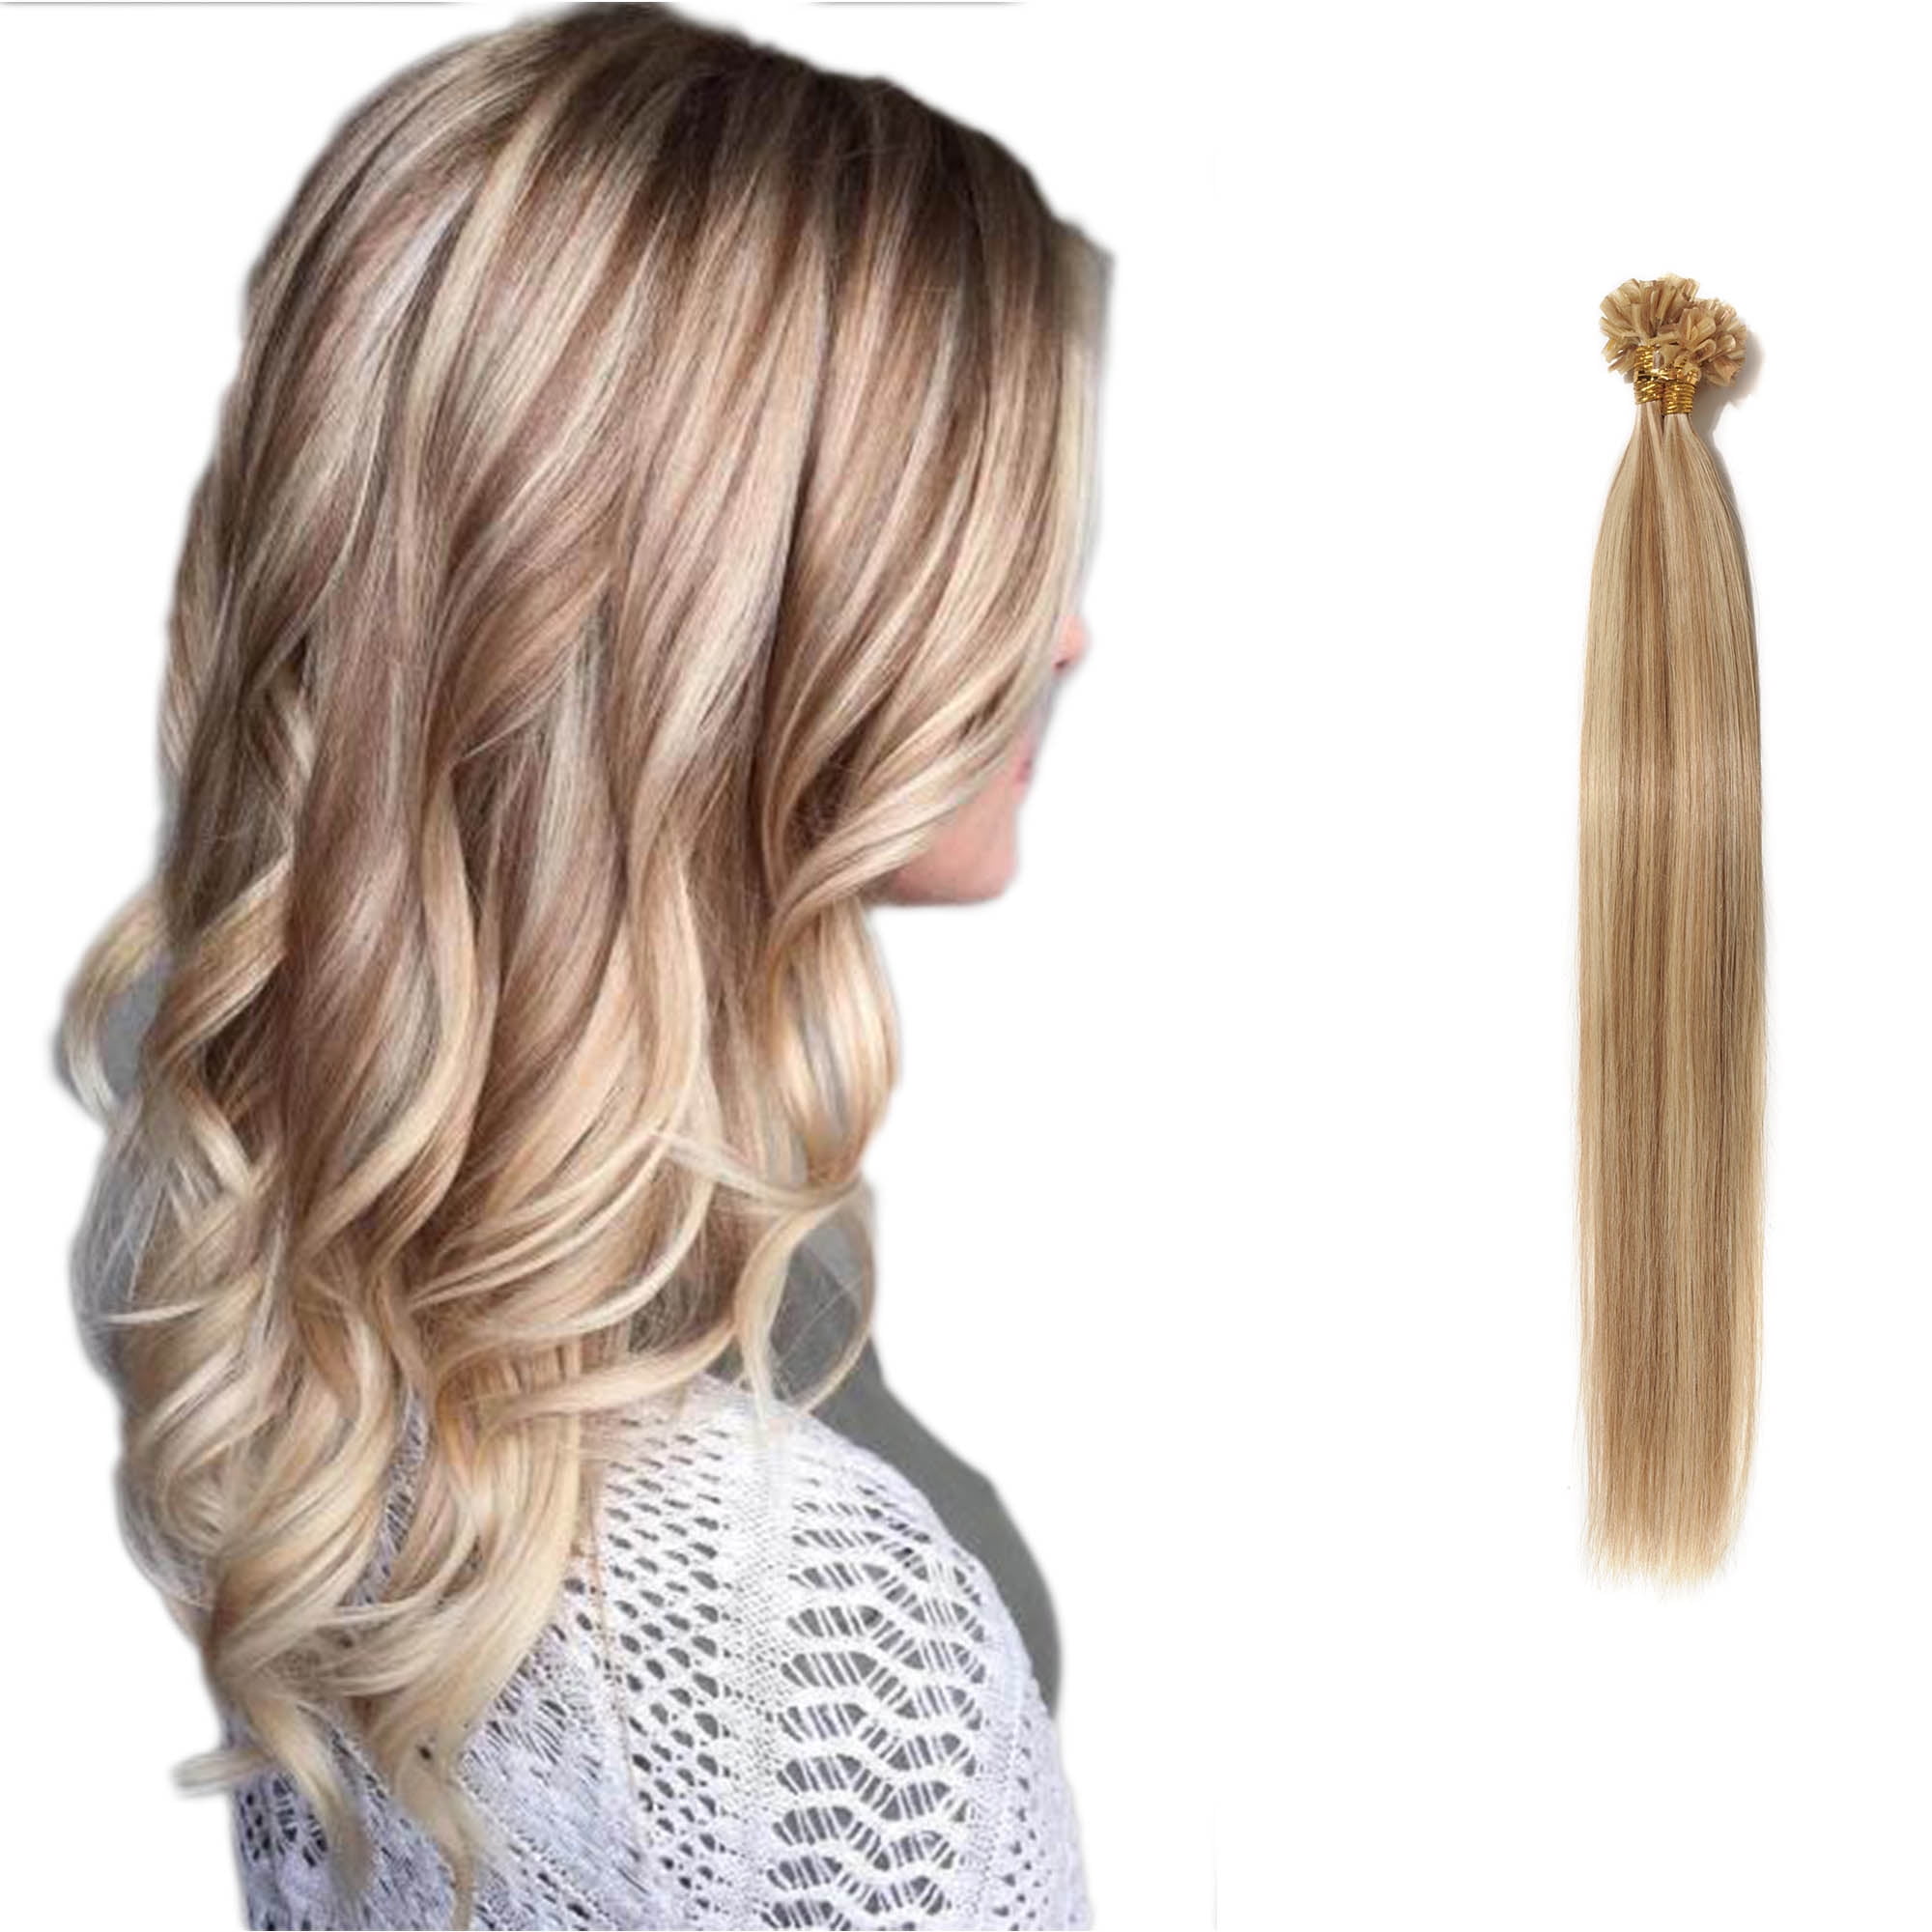 S-noilite 200 Strands Pre Bonded Human Hair Extensions U Tip Nail Tip  Keratin Remy Straight Brown & bleach blonde,20